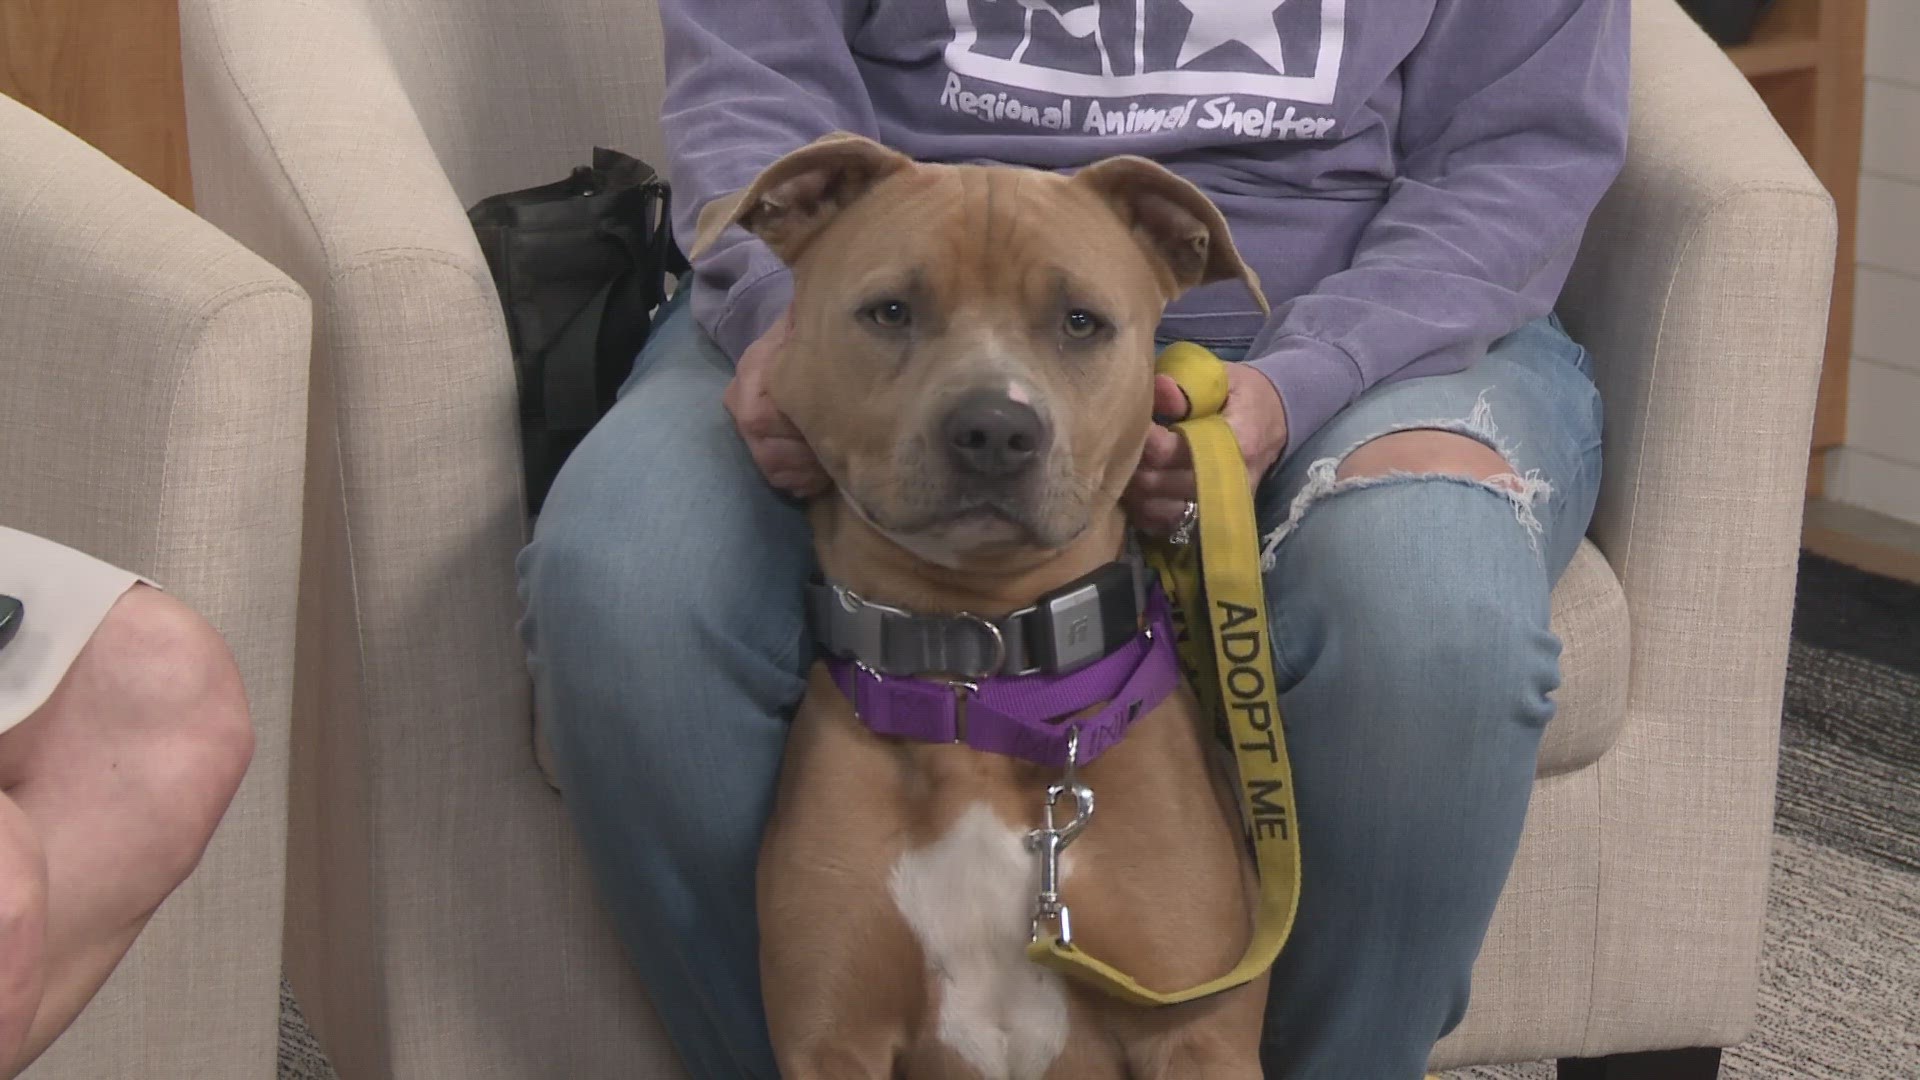 Every Friday on KVUE Midday, we feature an adorable dog available for adoption. This week, April Peiffer with the Williamson County Regional Center brought in Luke!